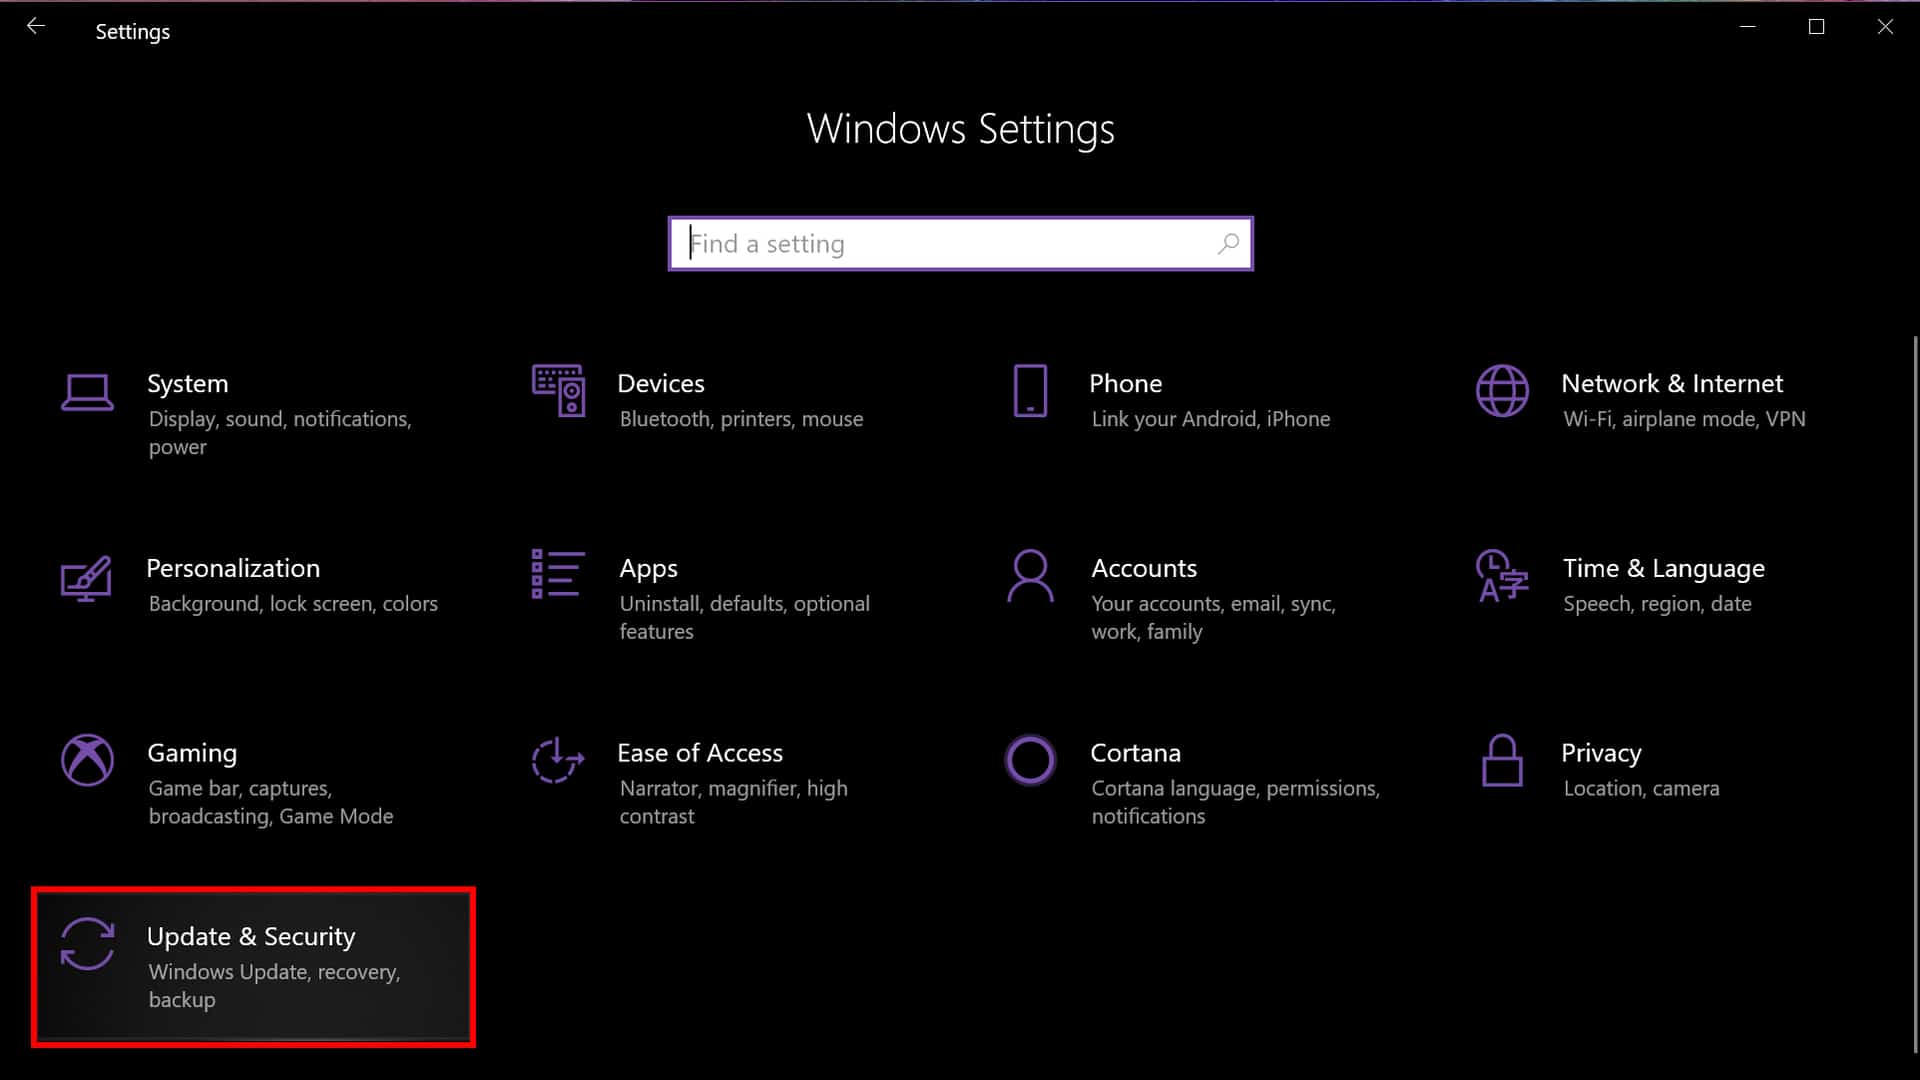 Windows 10 Update and security